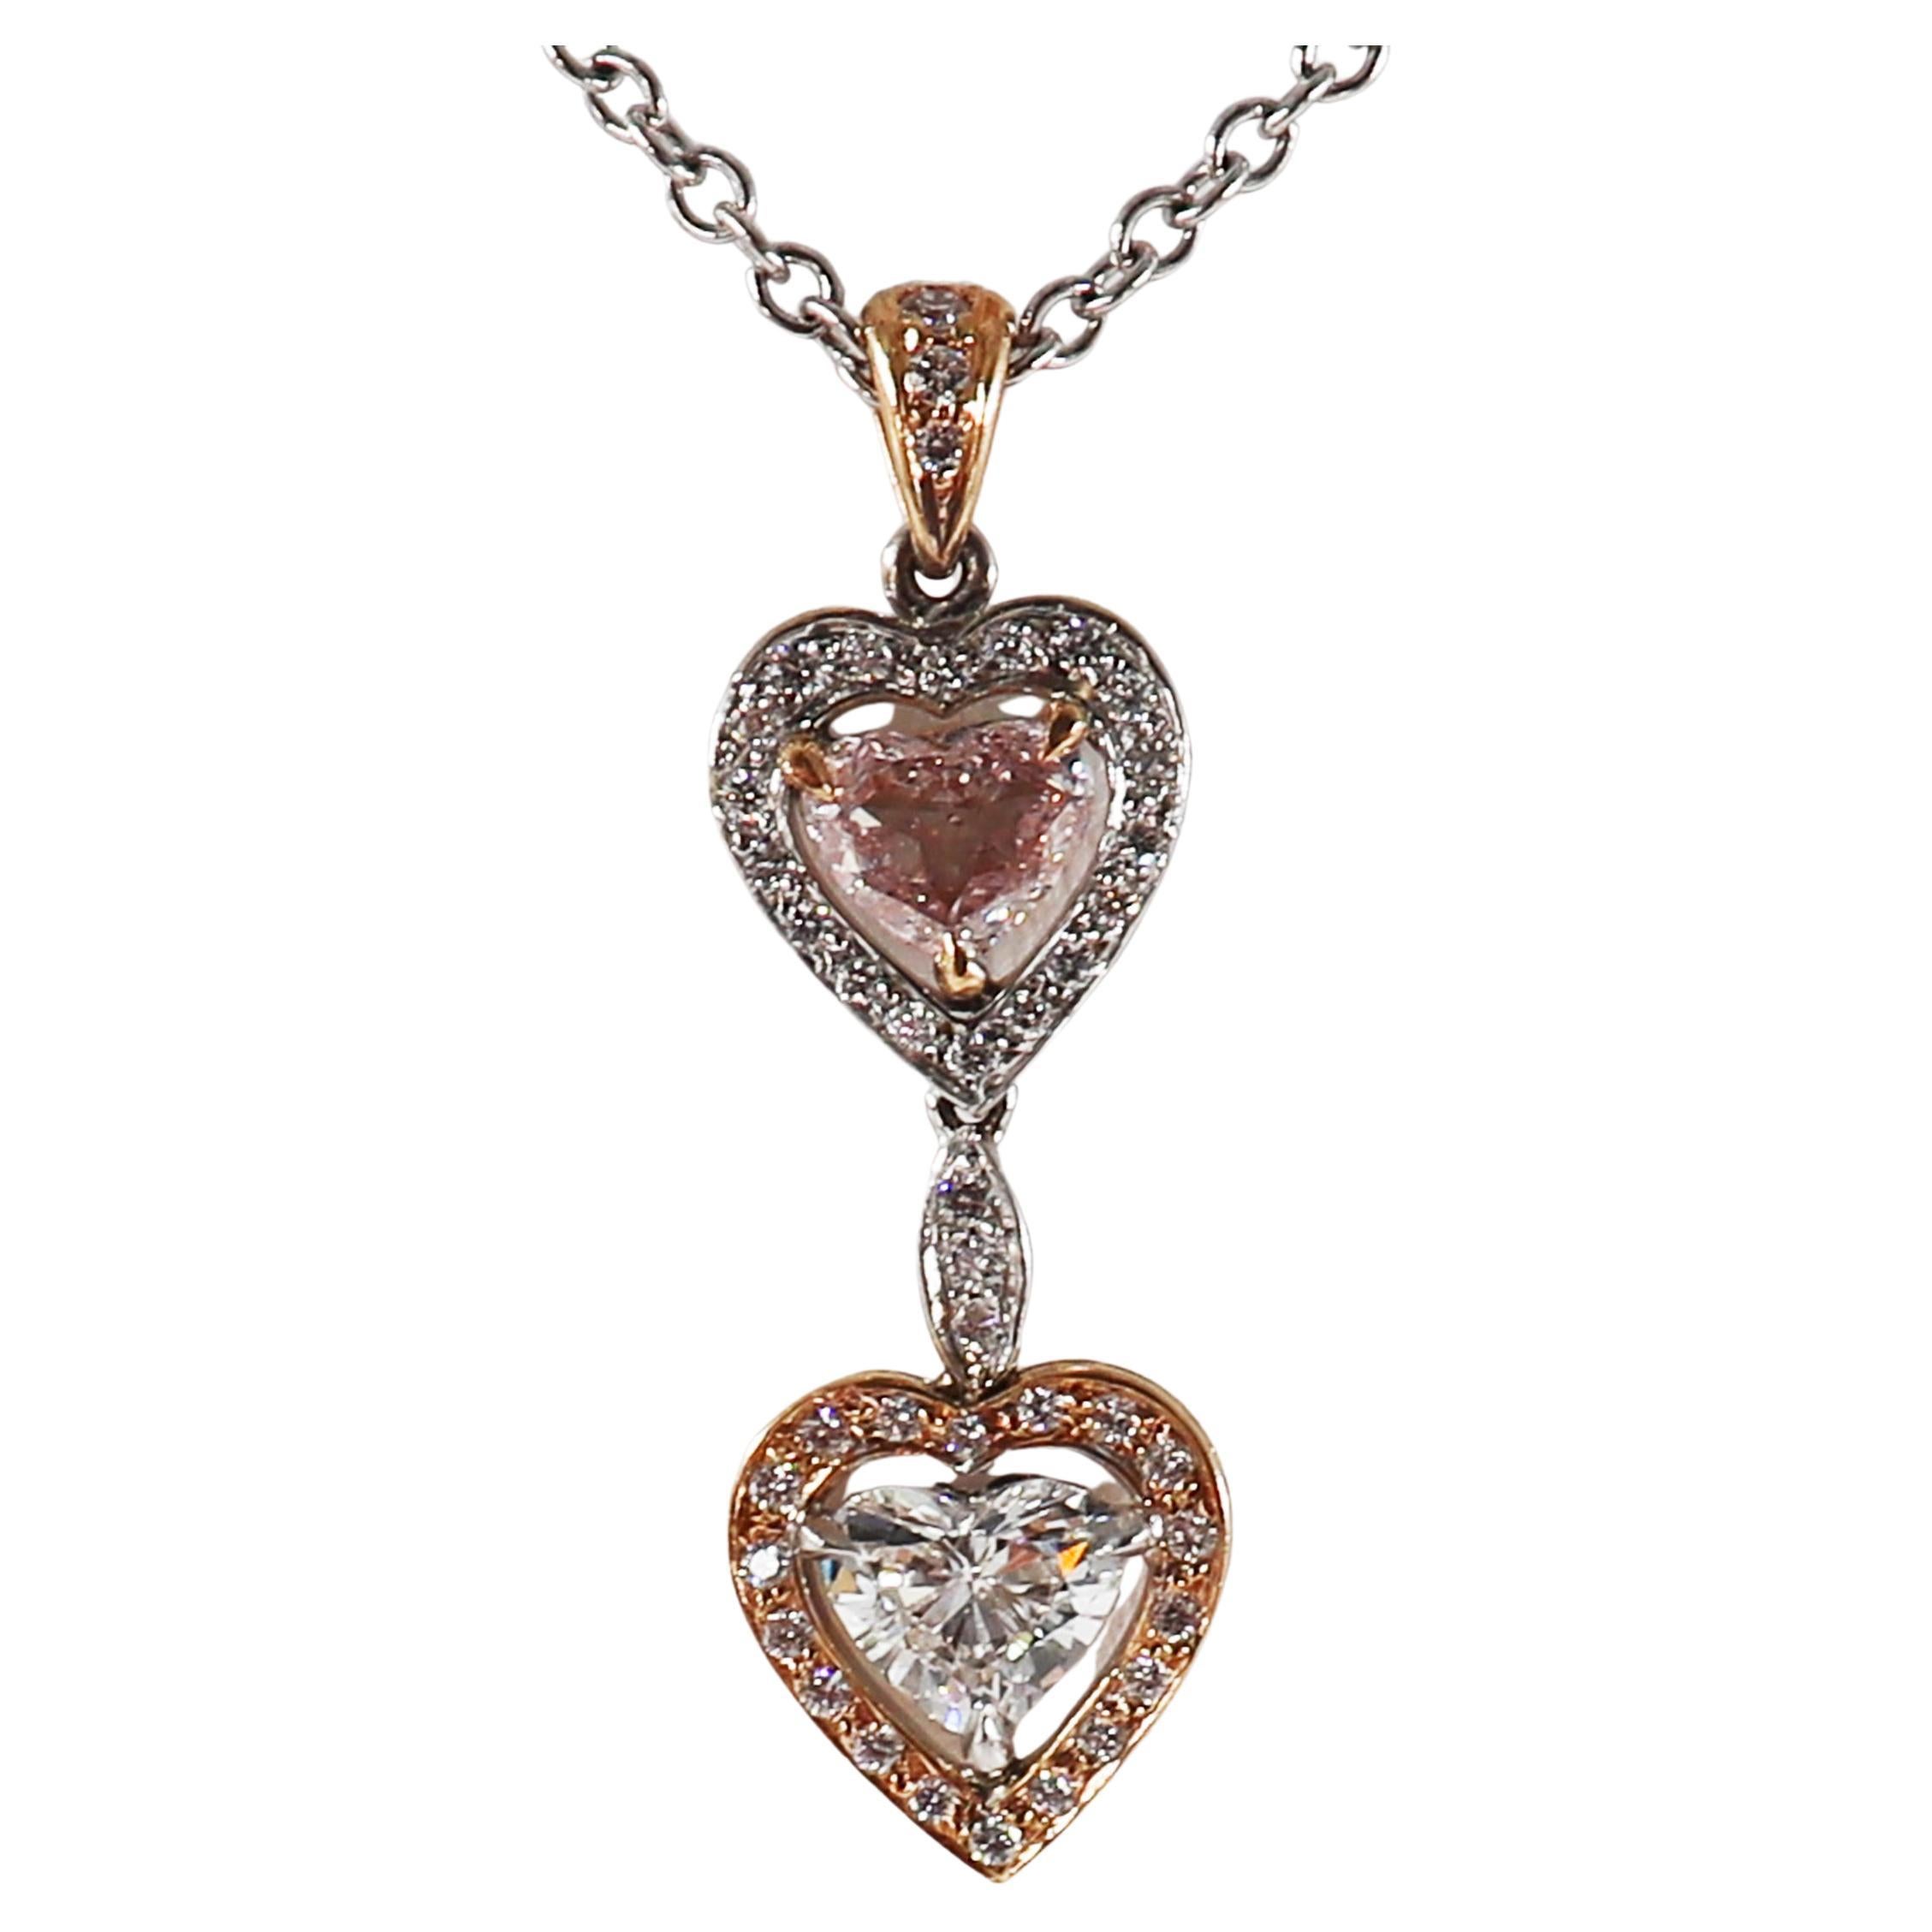 Charming Heart Shaped Pendant Necklace For Sale